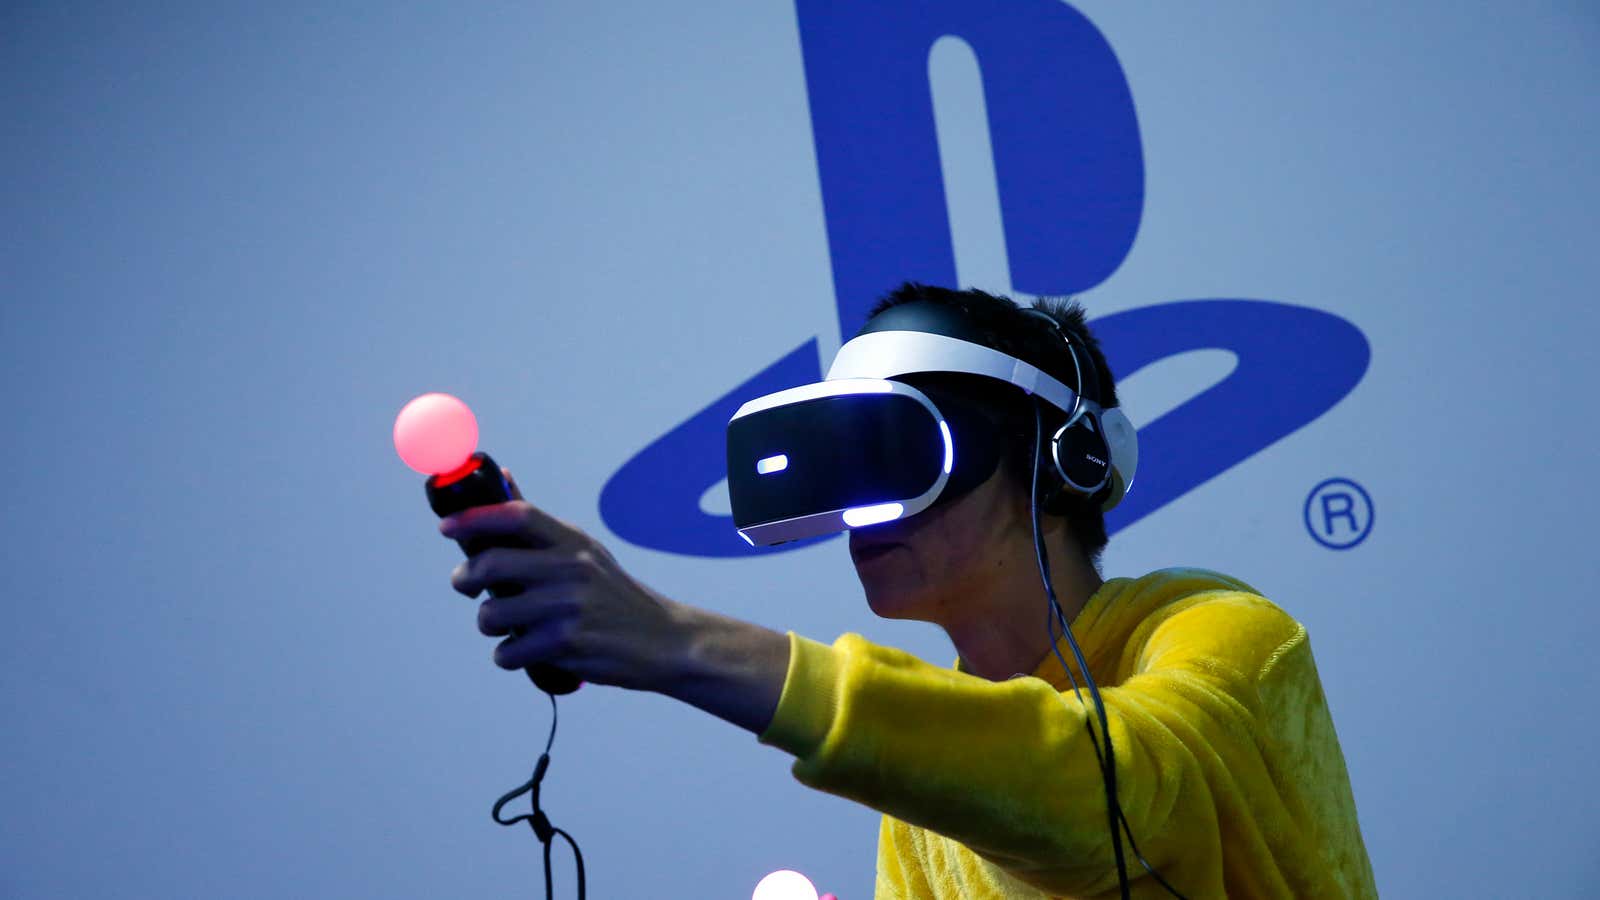 PSVR 2 is a VR system built for an immersive gaming experience, The  DeanBeat